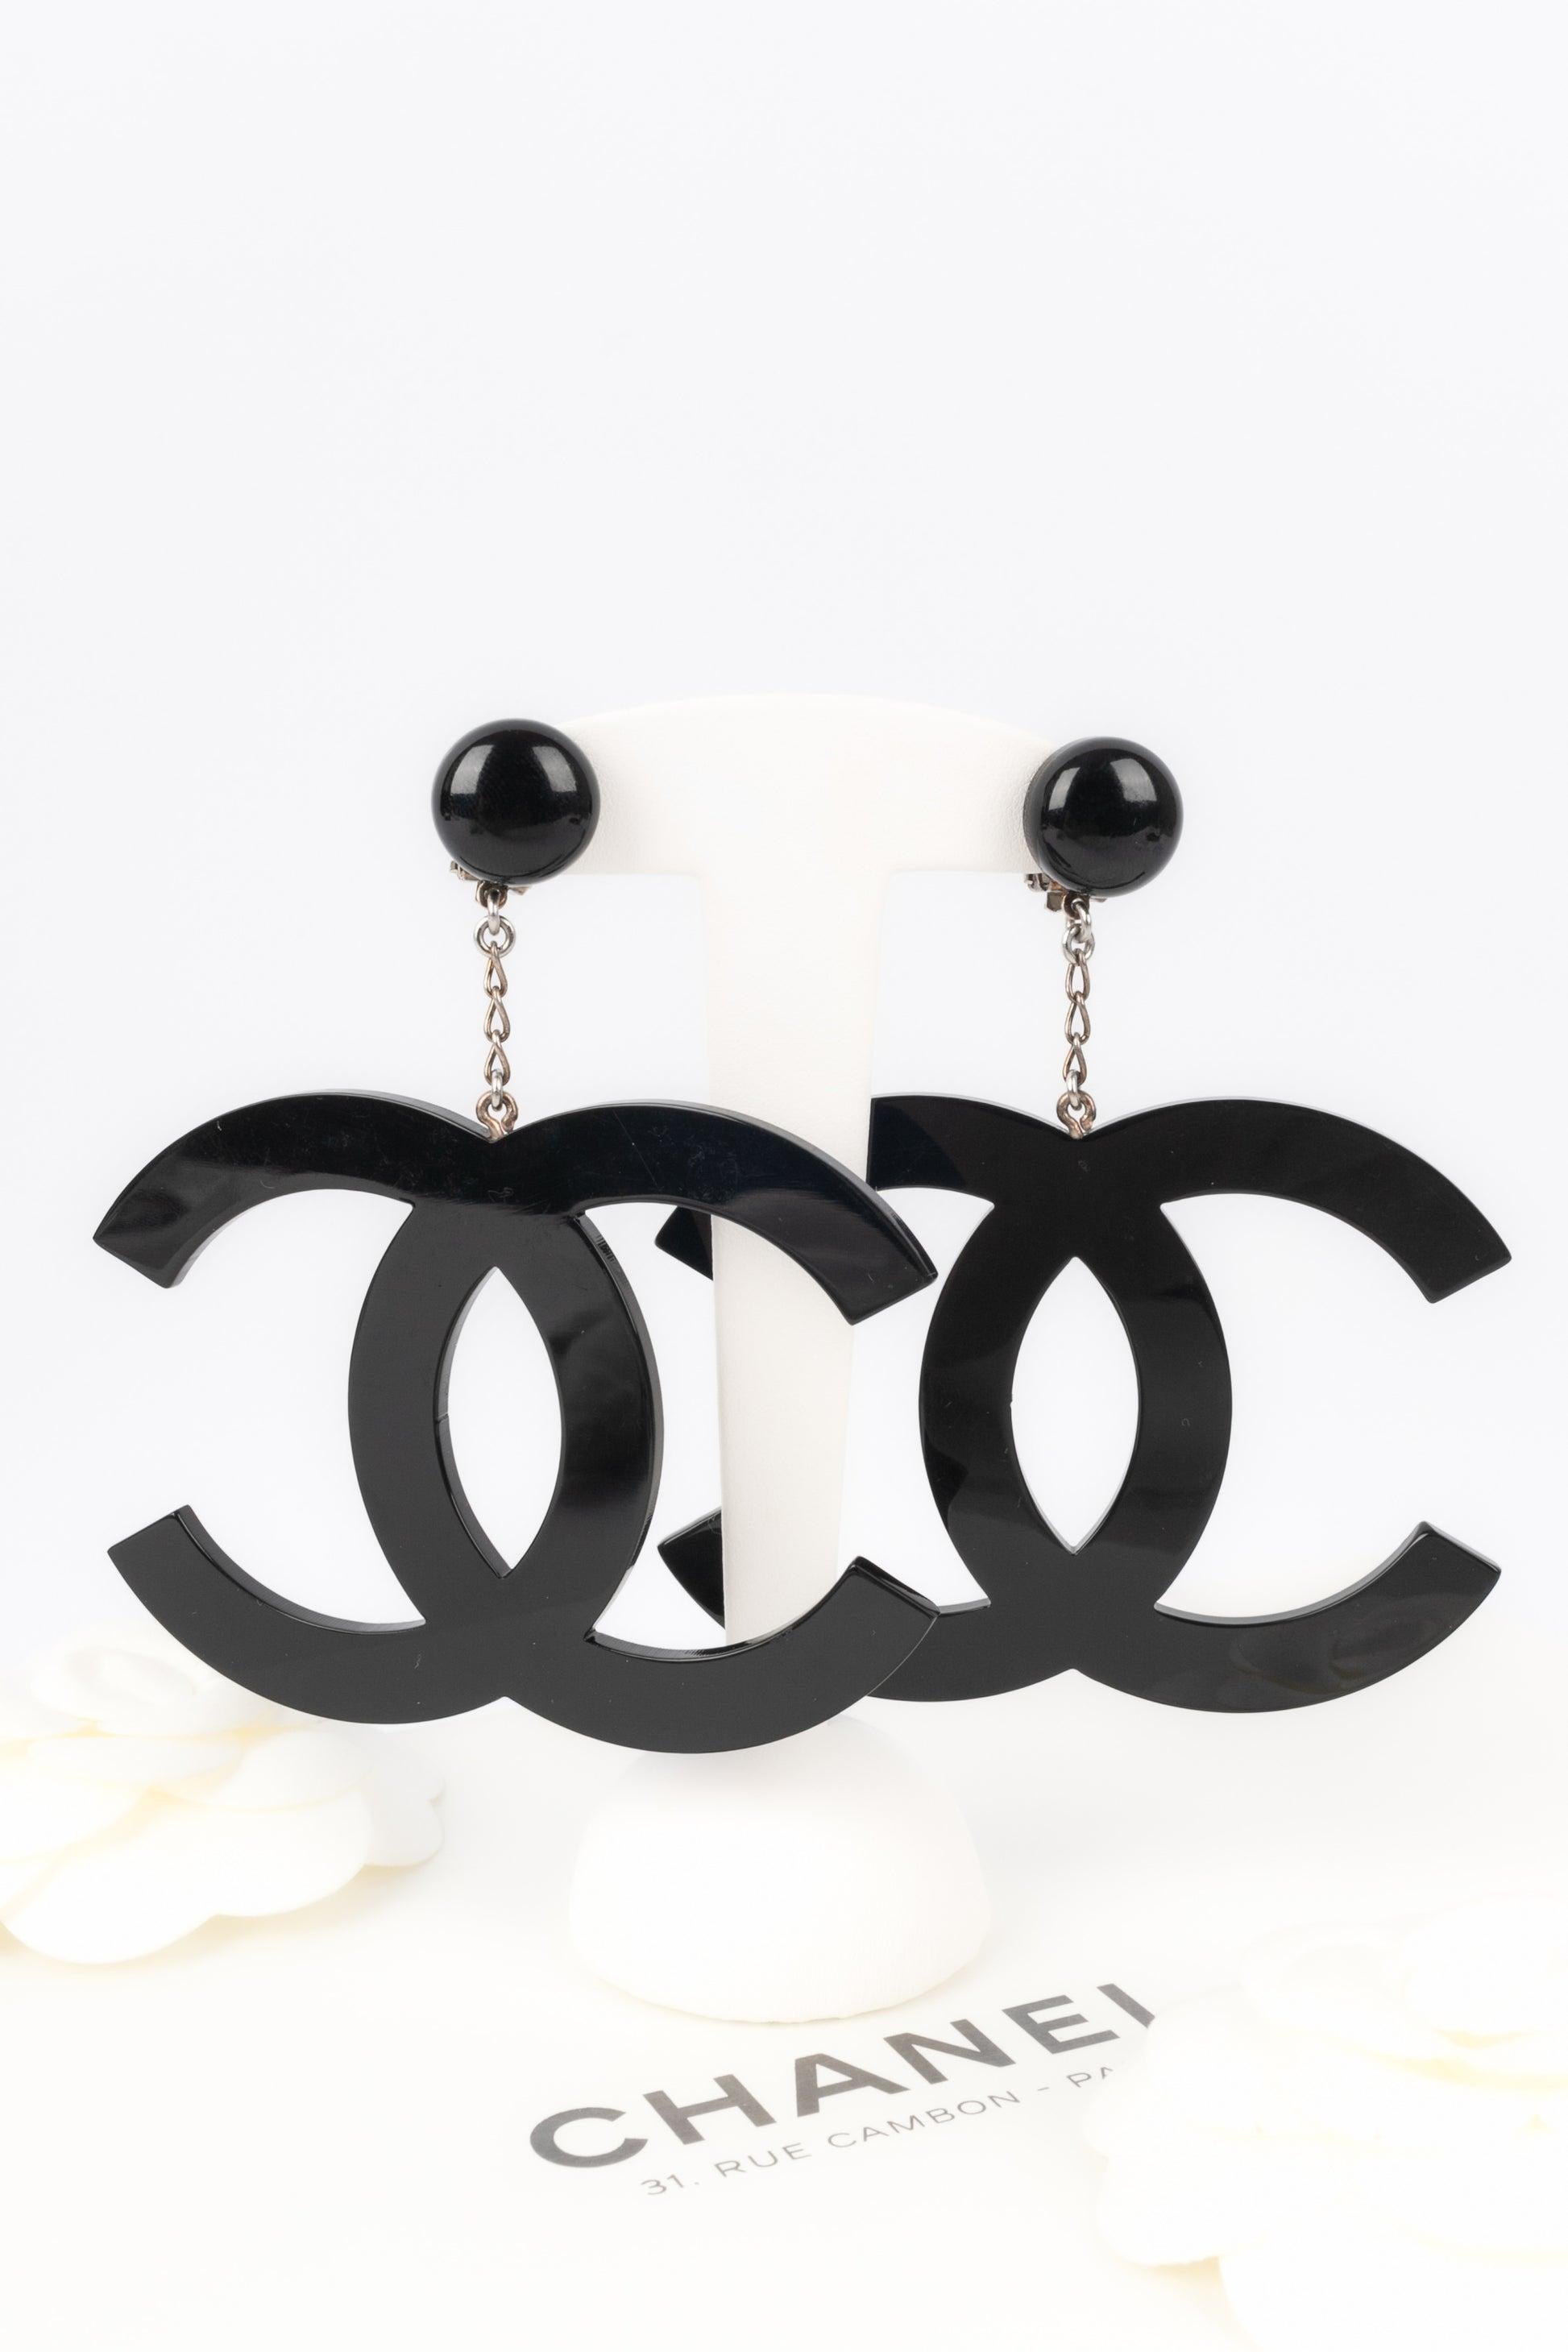 Chanel - (Made in France) Black Bakelite cc logo earrings. 1996 Spring-Summer Collection.

Additional information:
Condition: Very good condition
Dimensions: Height: 9 cm
Period: 20th Century

Seller Reference: BOB100